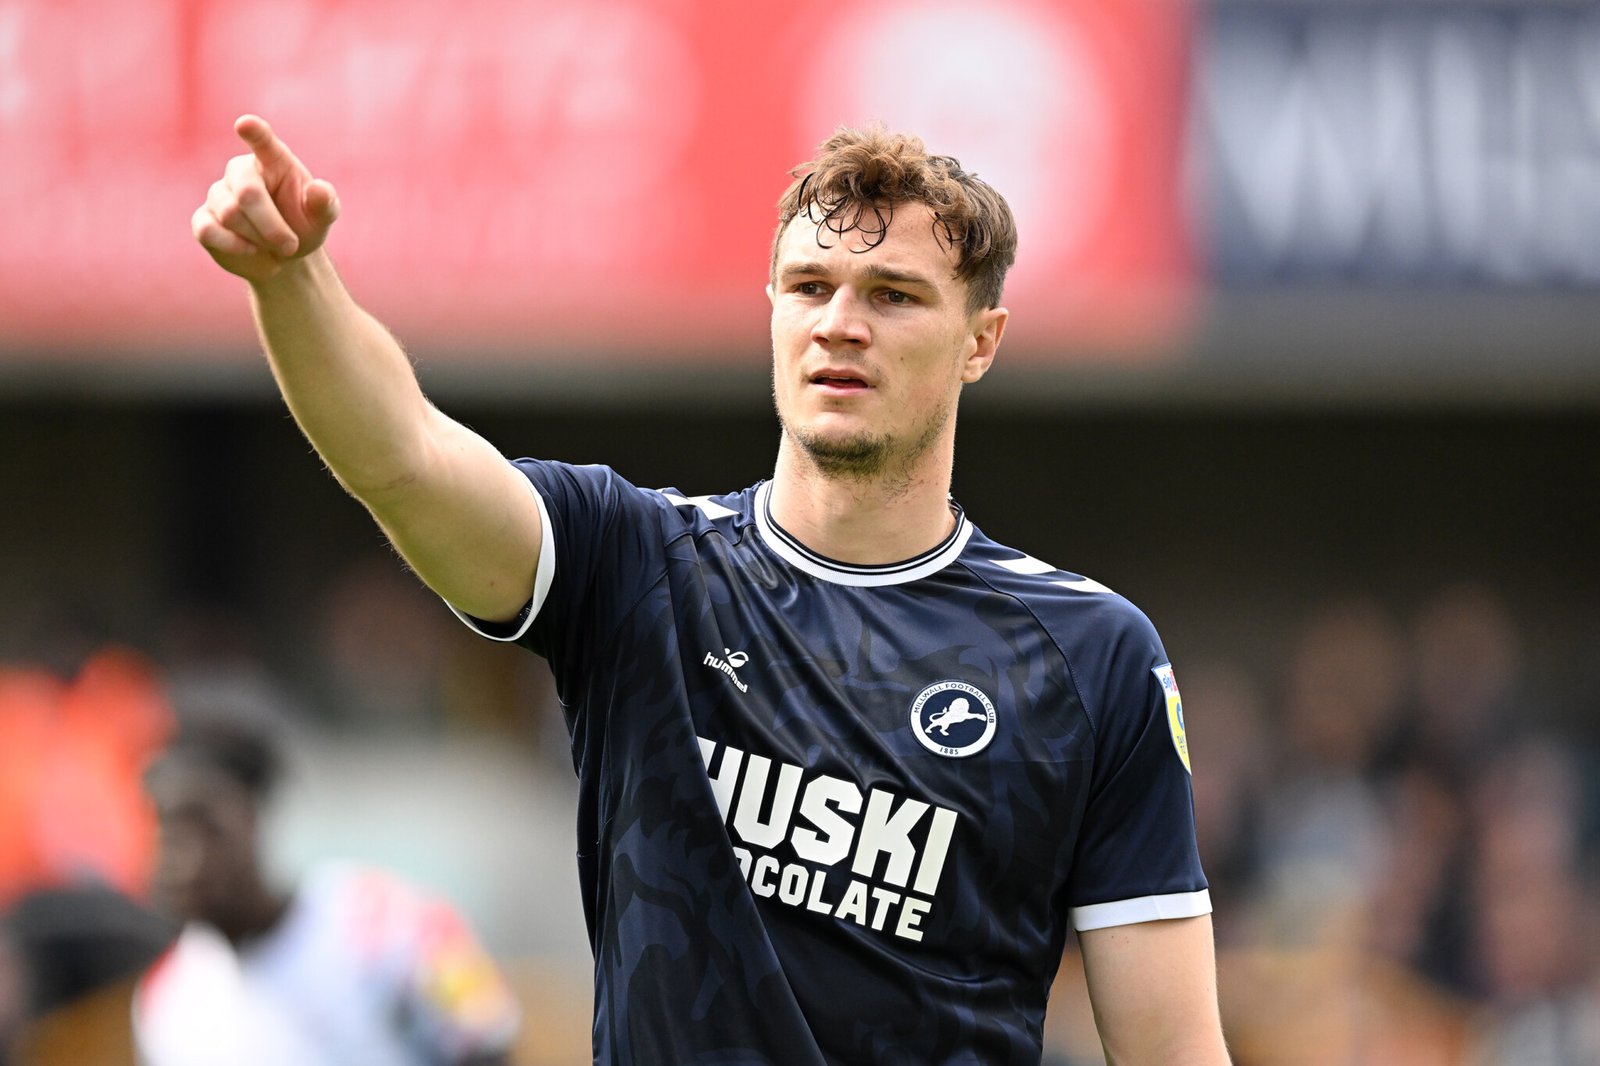 Millwall 0-3 Swansea: Michael Duff's Swans cruise to victory at The Den, Football News